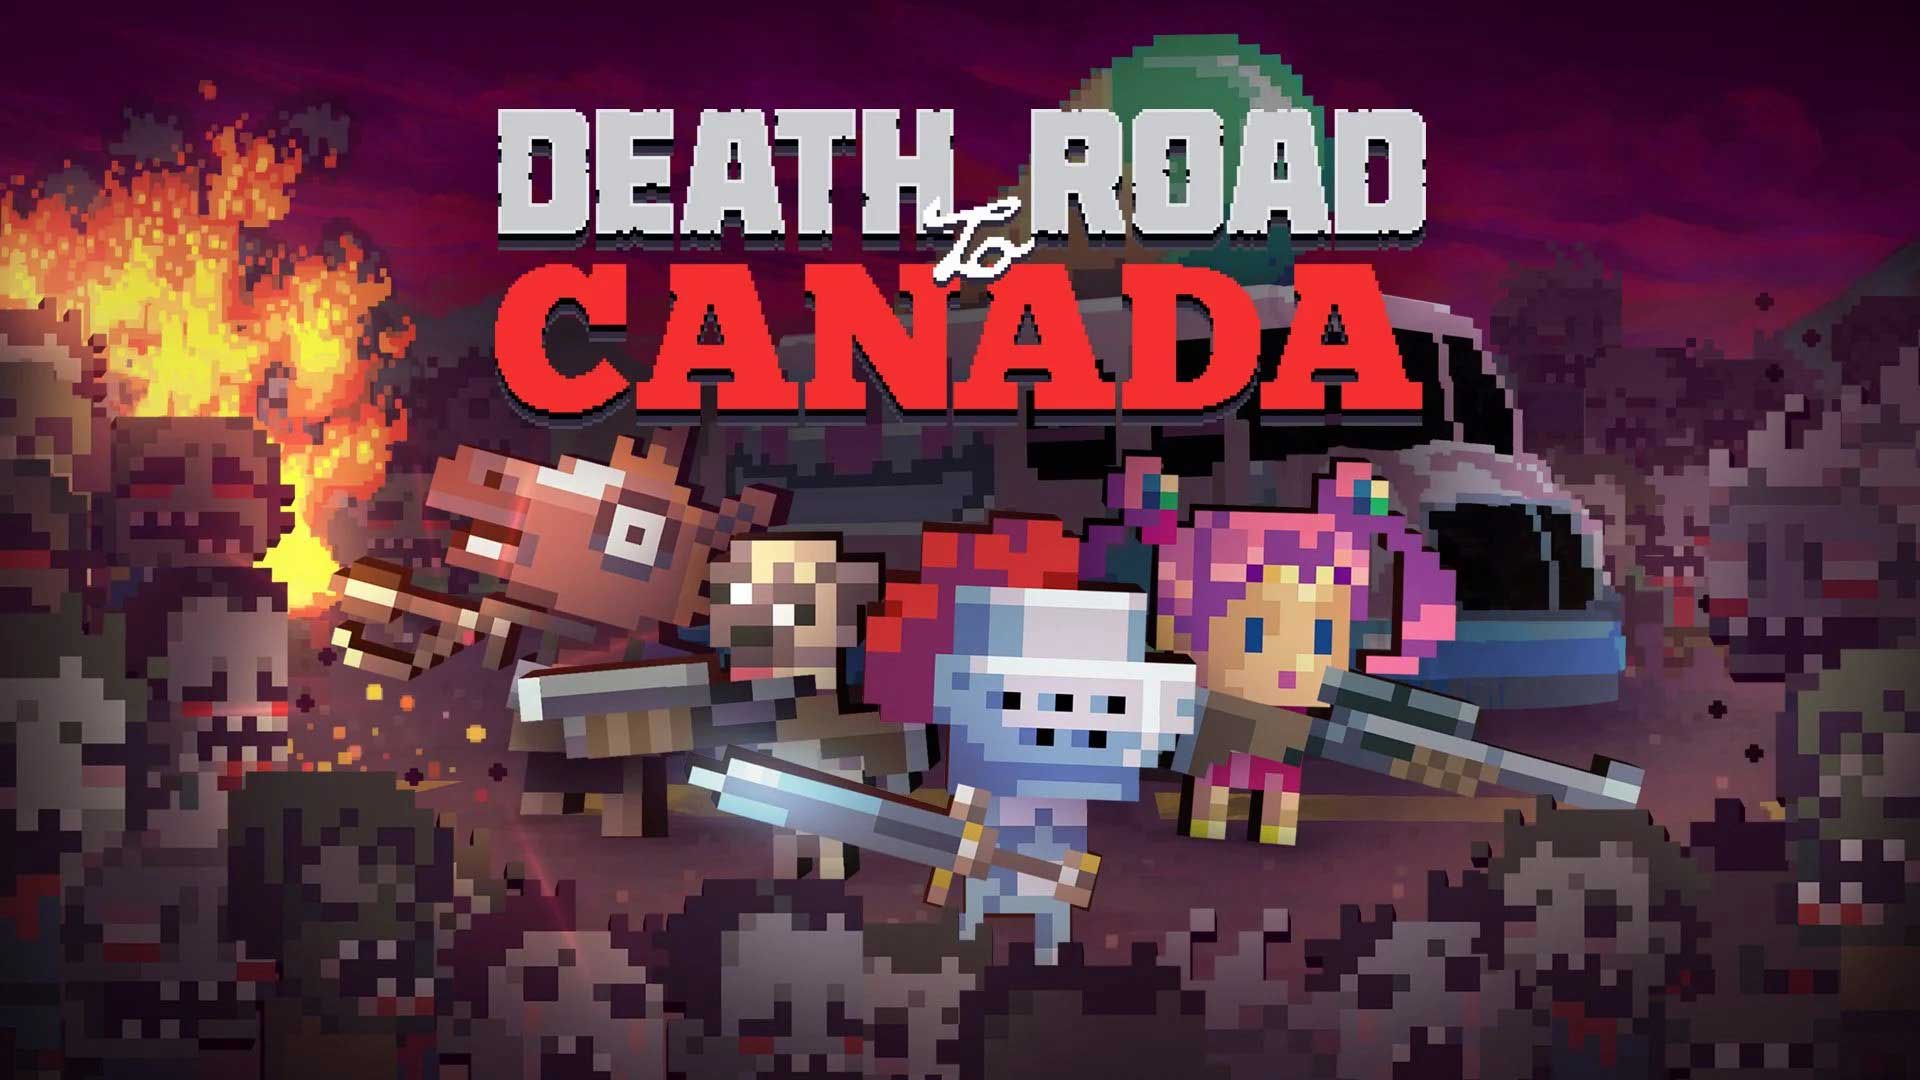 Android game Death Road to Canada